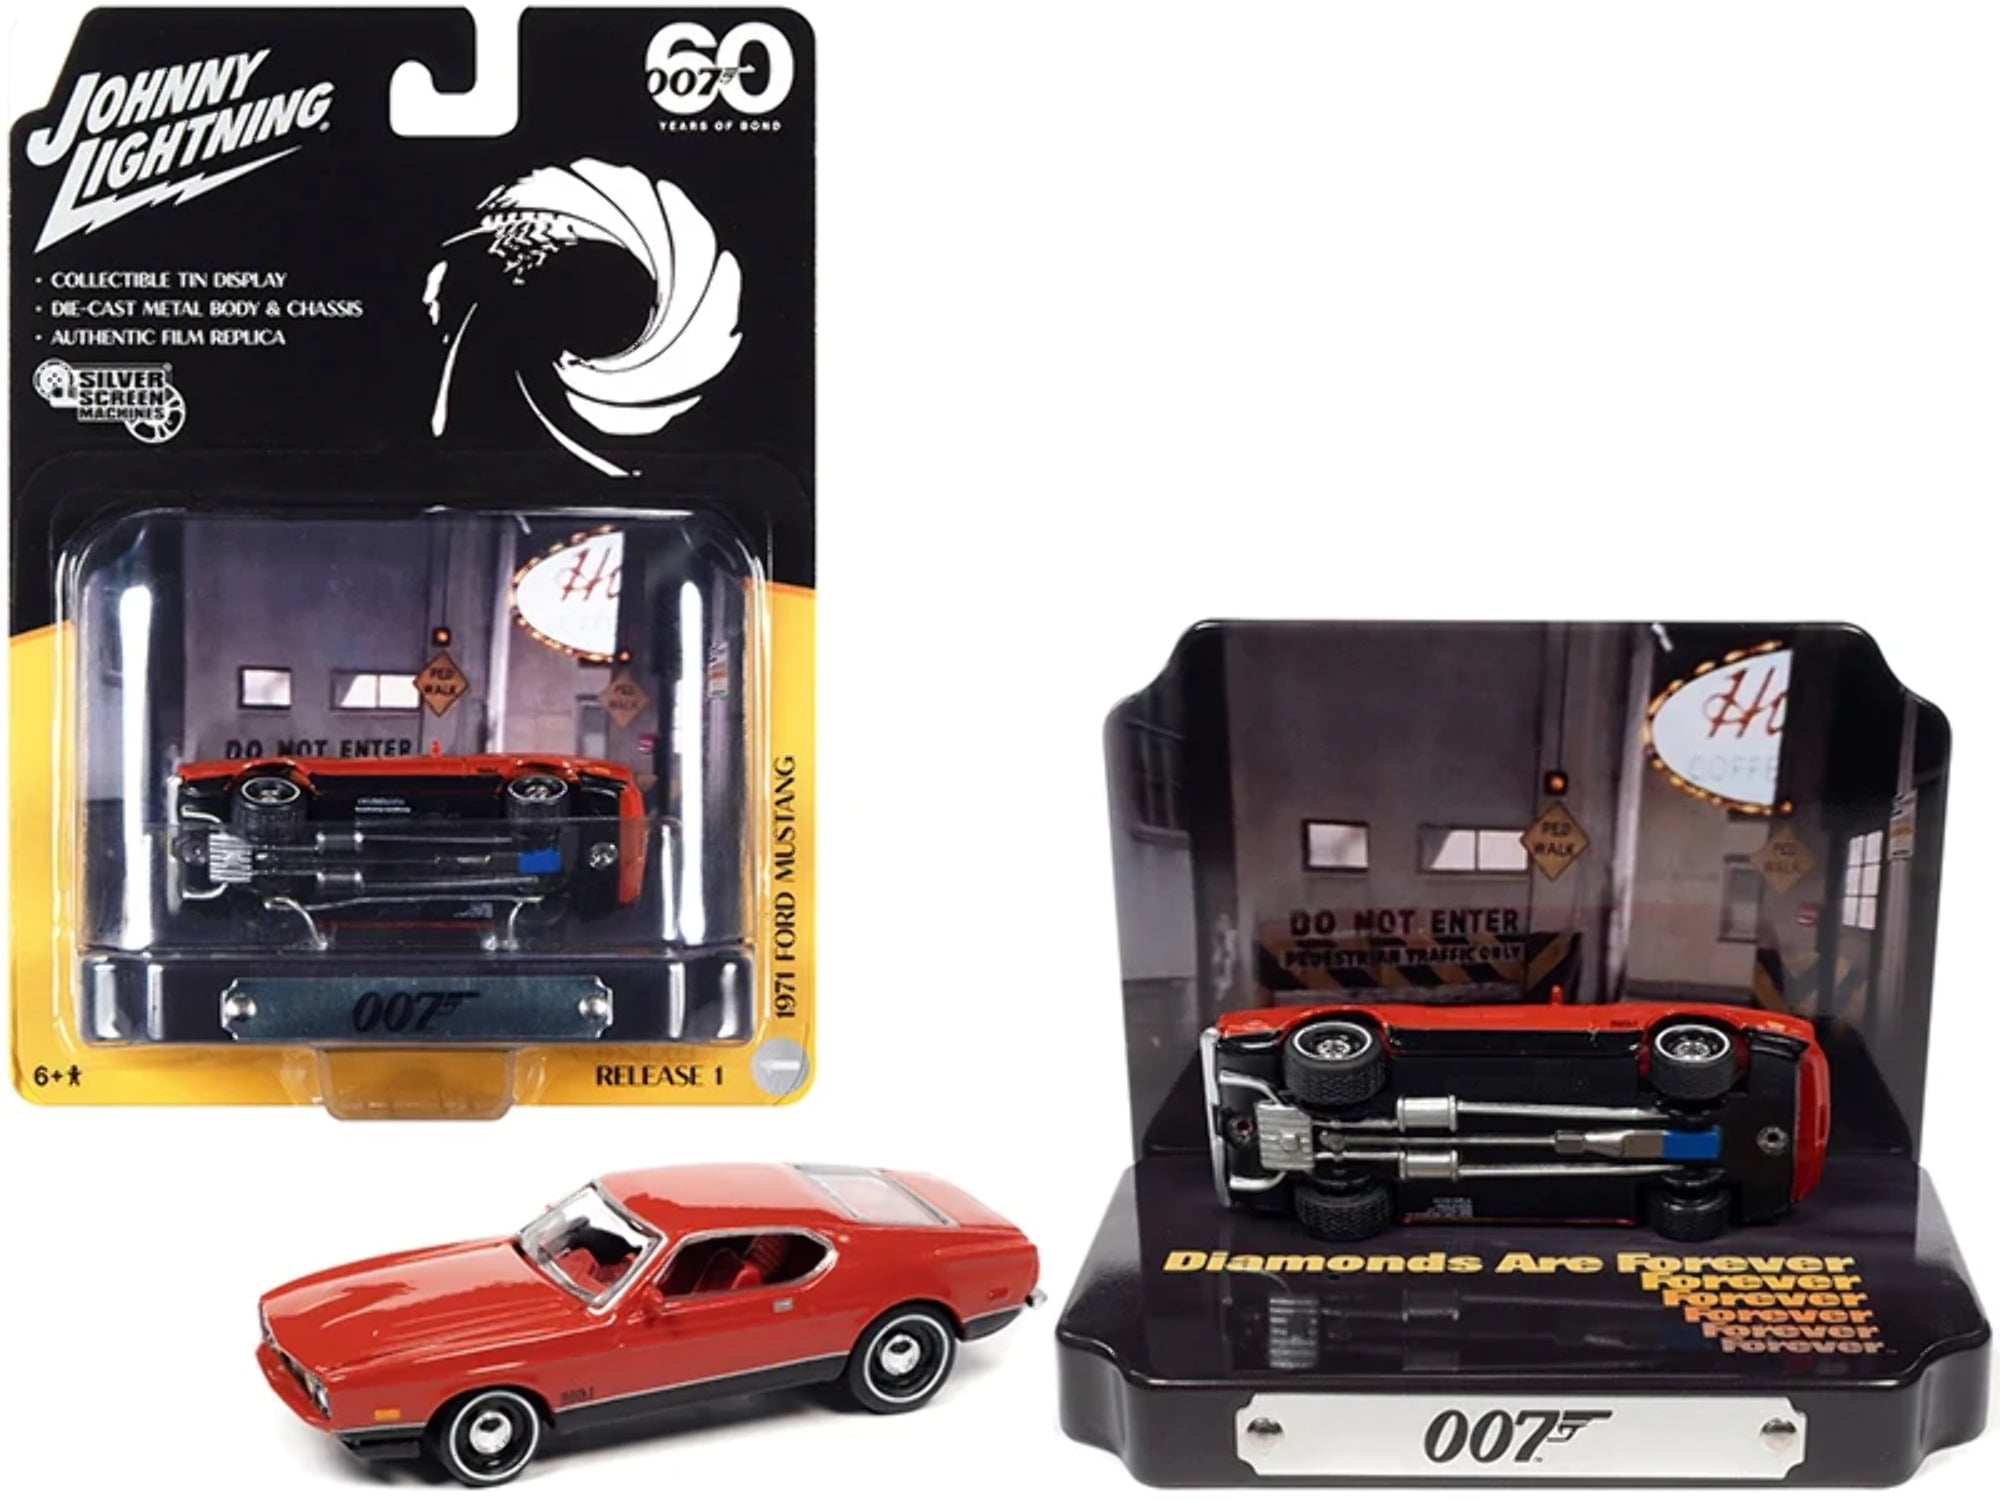 3 in. 1-64 Scale 1971 Ford Mustang Mach 1 with Collectible Tin Display 007 Diamonds Are Forever Movie 60 Years Of Bond Diecast Model Car, Red -  Diecast Dropshipper, JLDR016-FORD